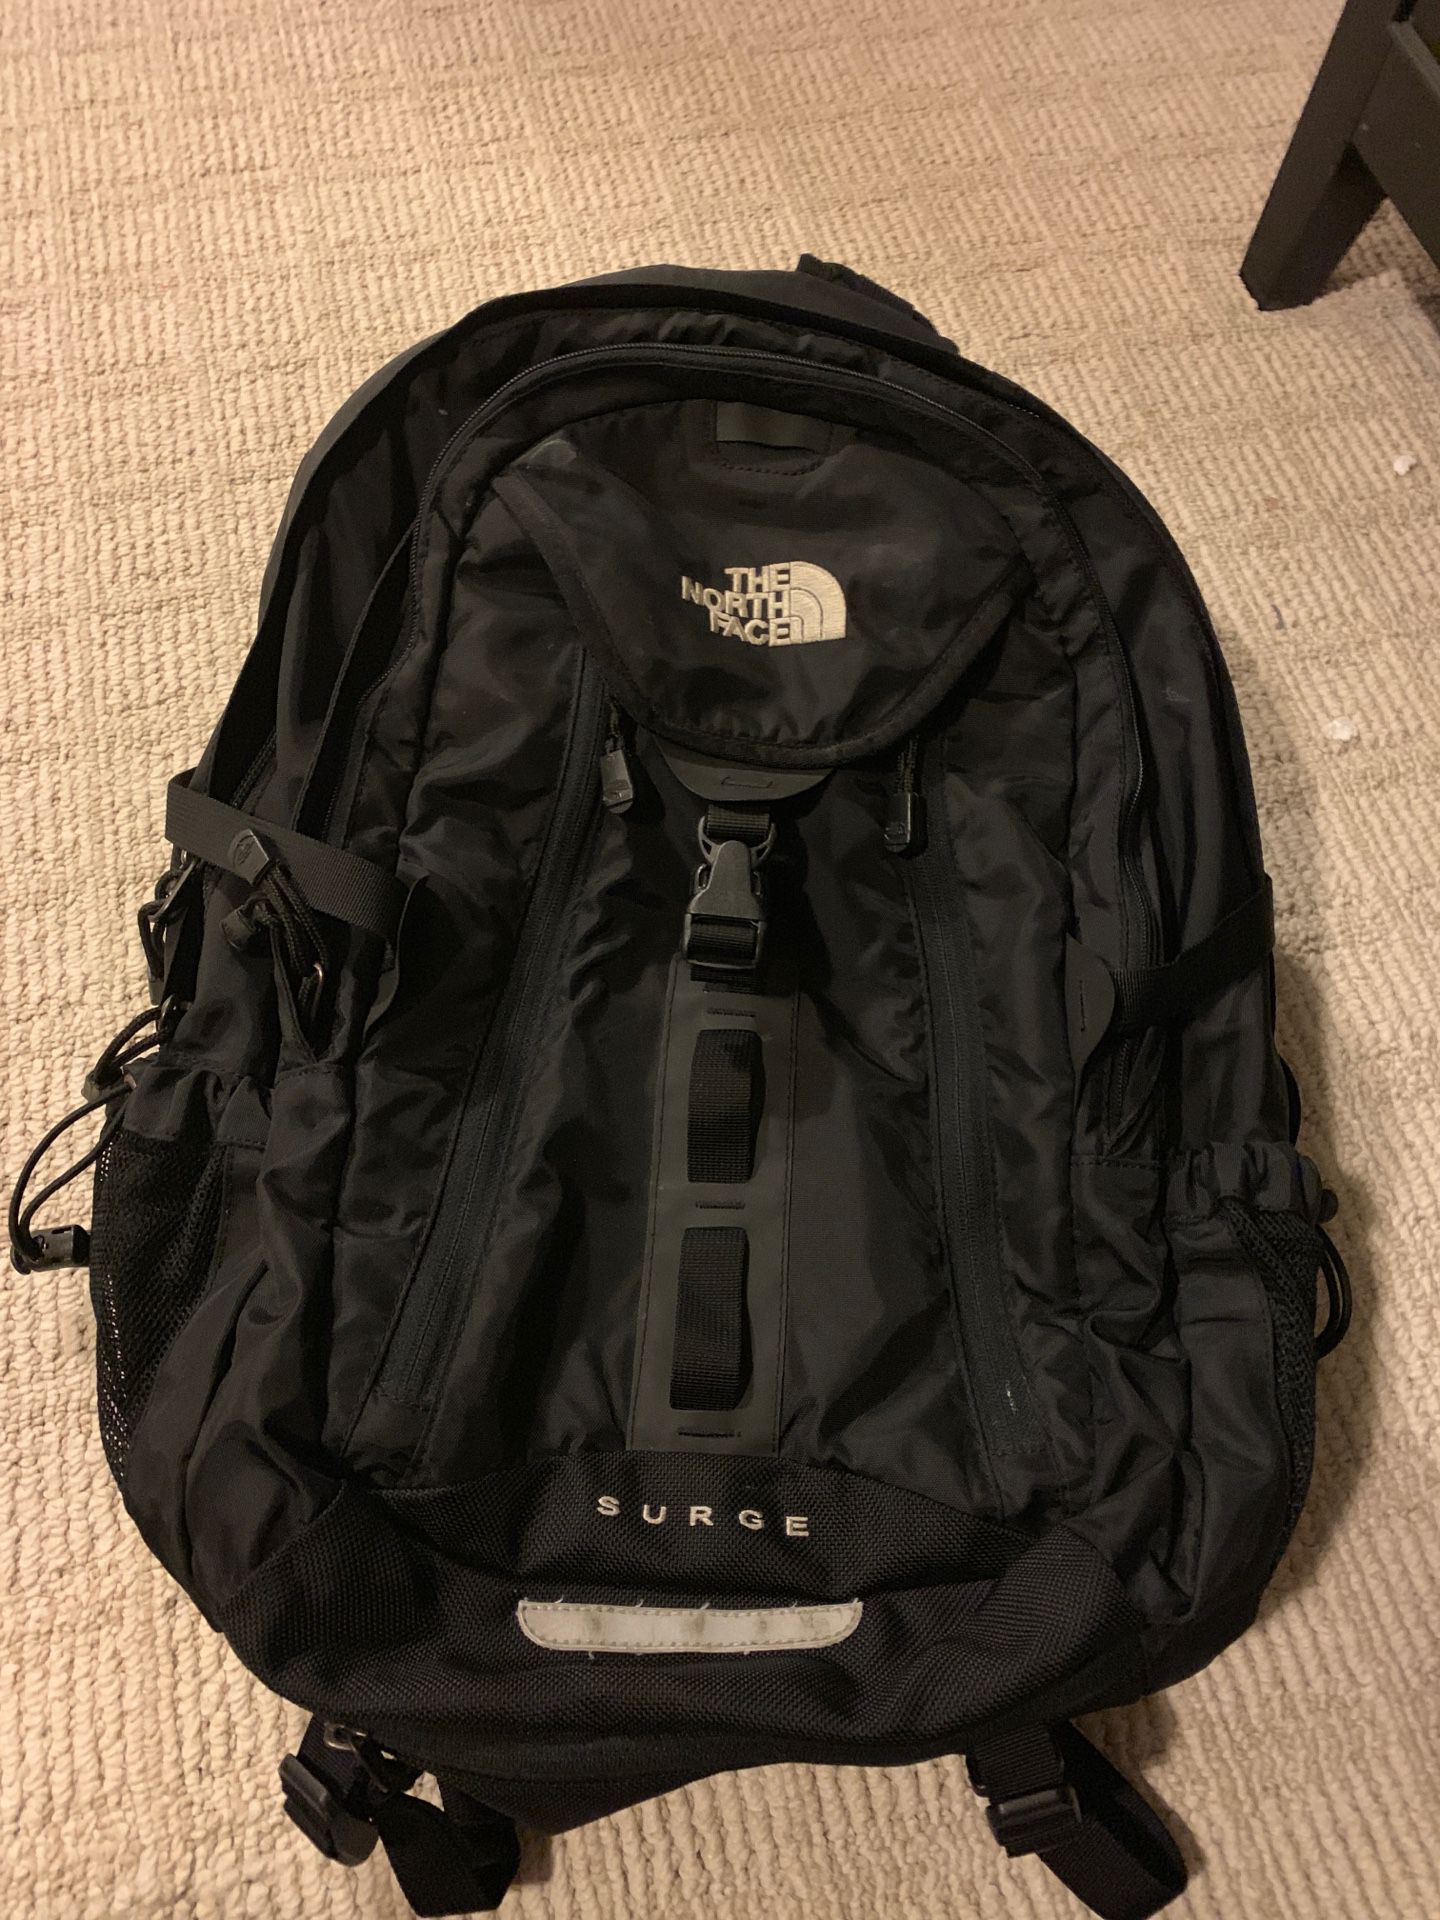 The North Face Surge Backpack/Laptop Bag